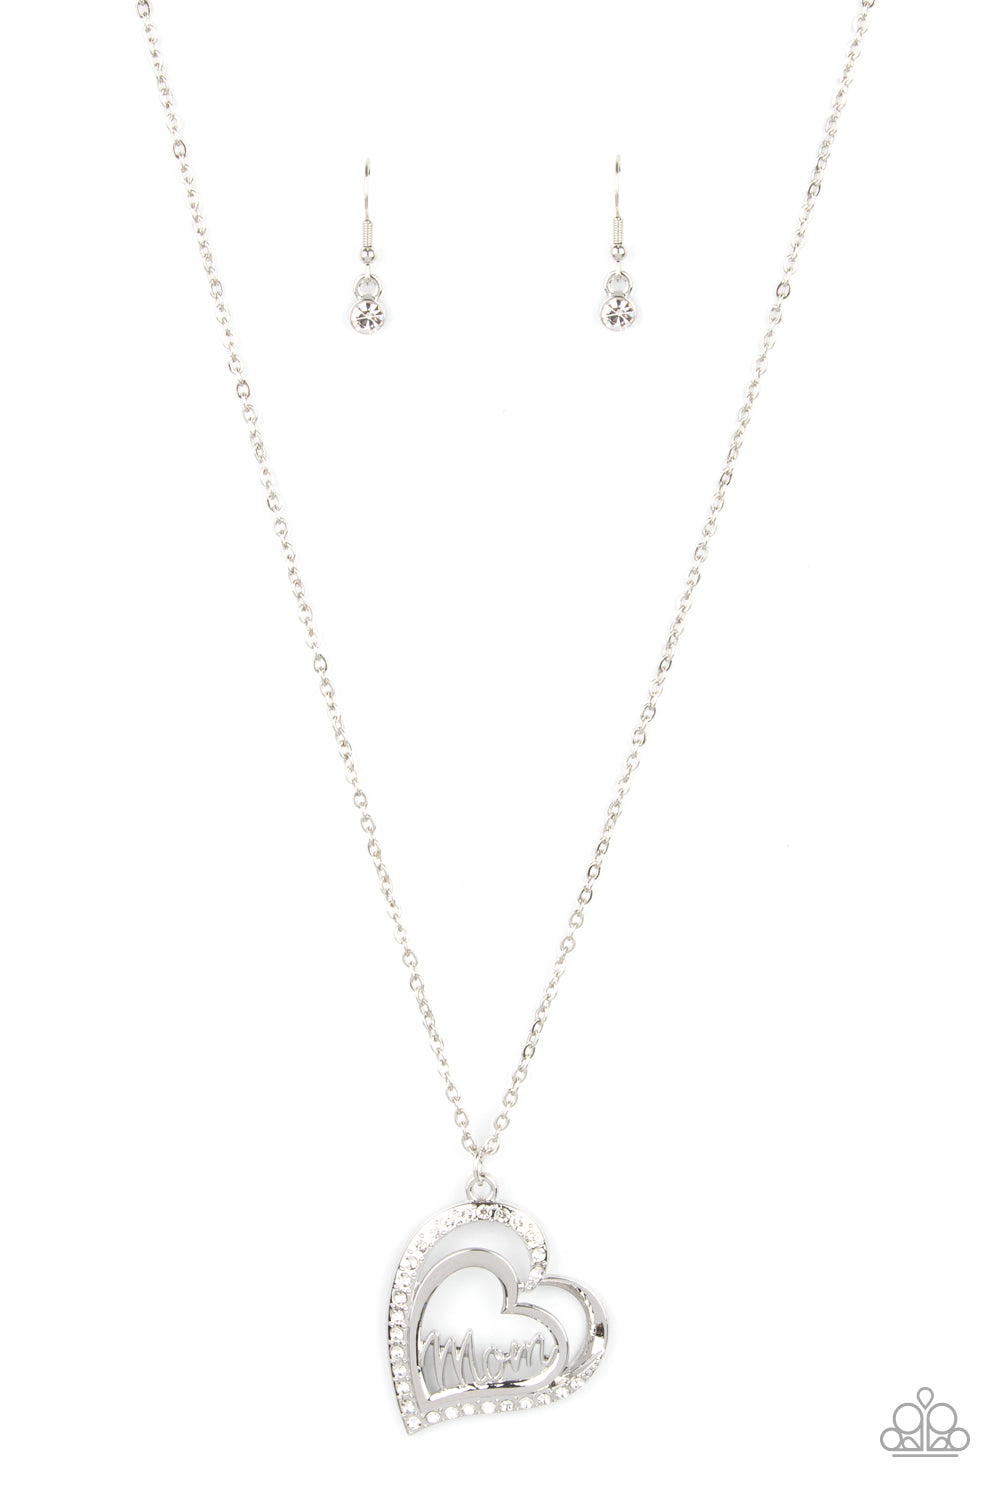 Paparazzi Accessories - A Mothers Heart - White Necklace